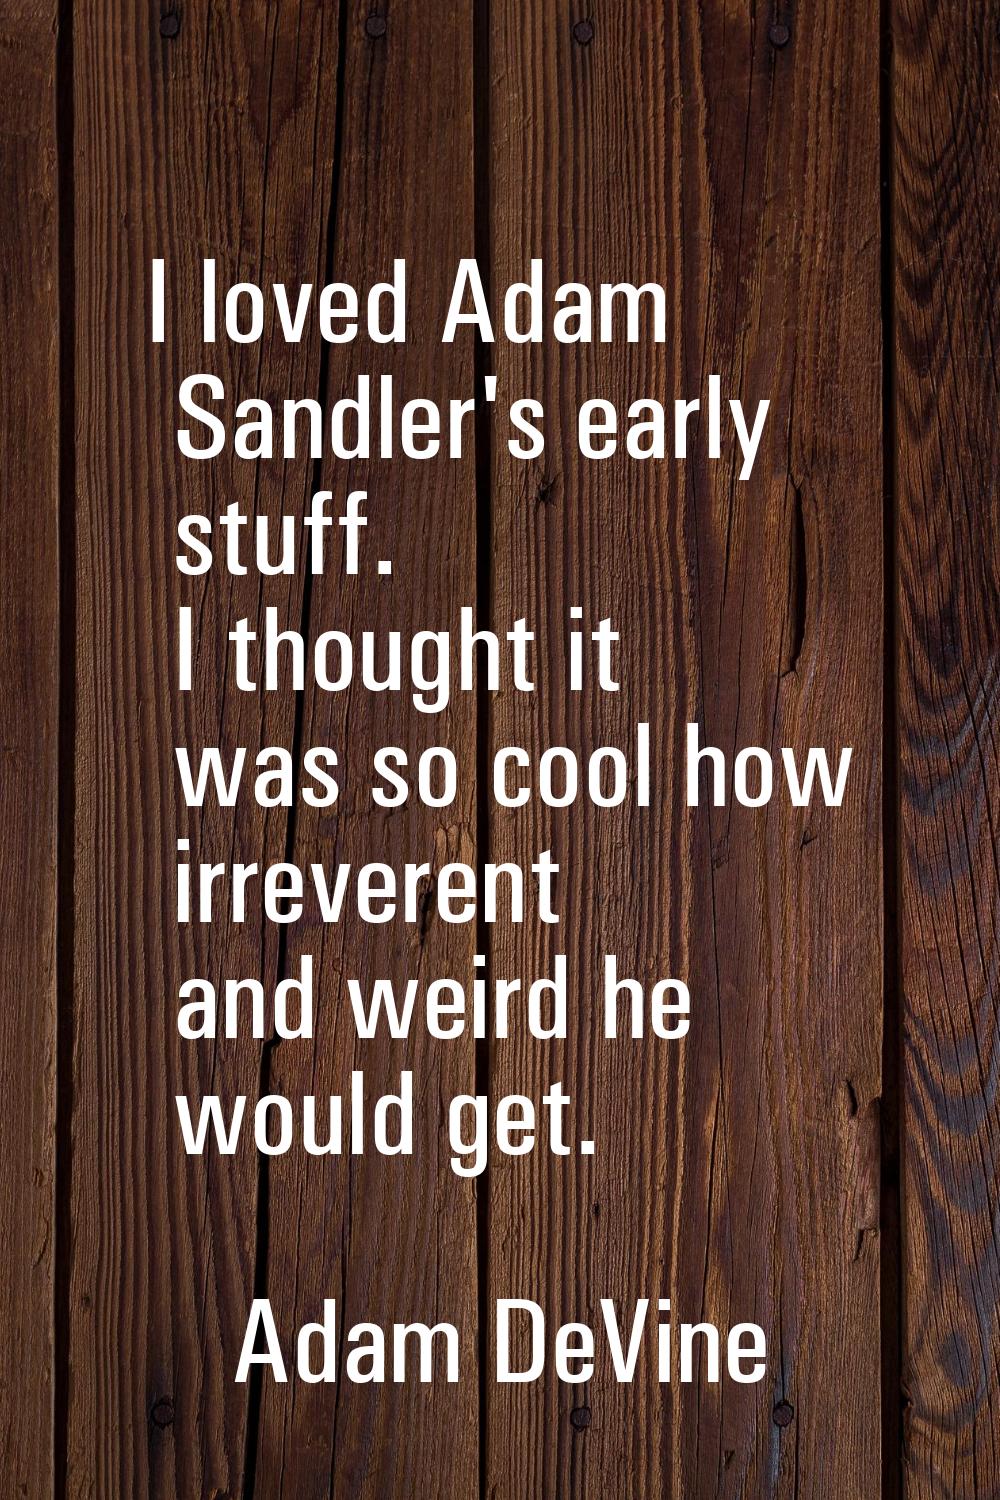 I loved Adam Sandler's early stuff. I thought it was so cool how irreverent and weird he would get.